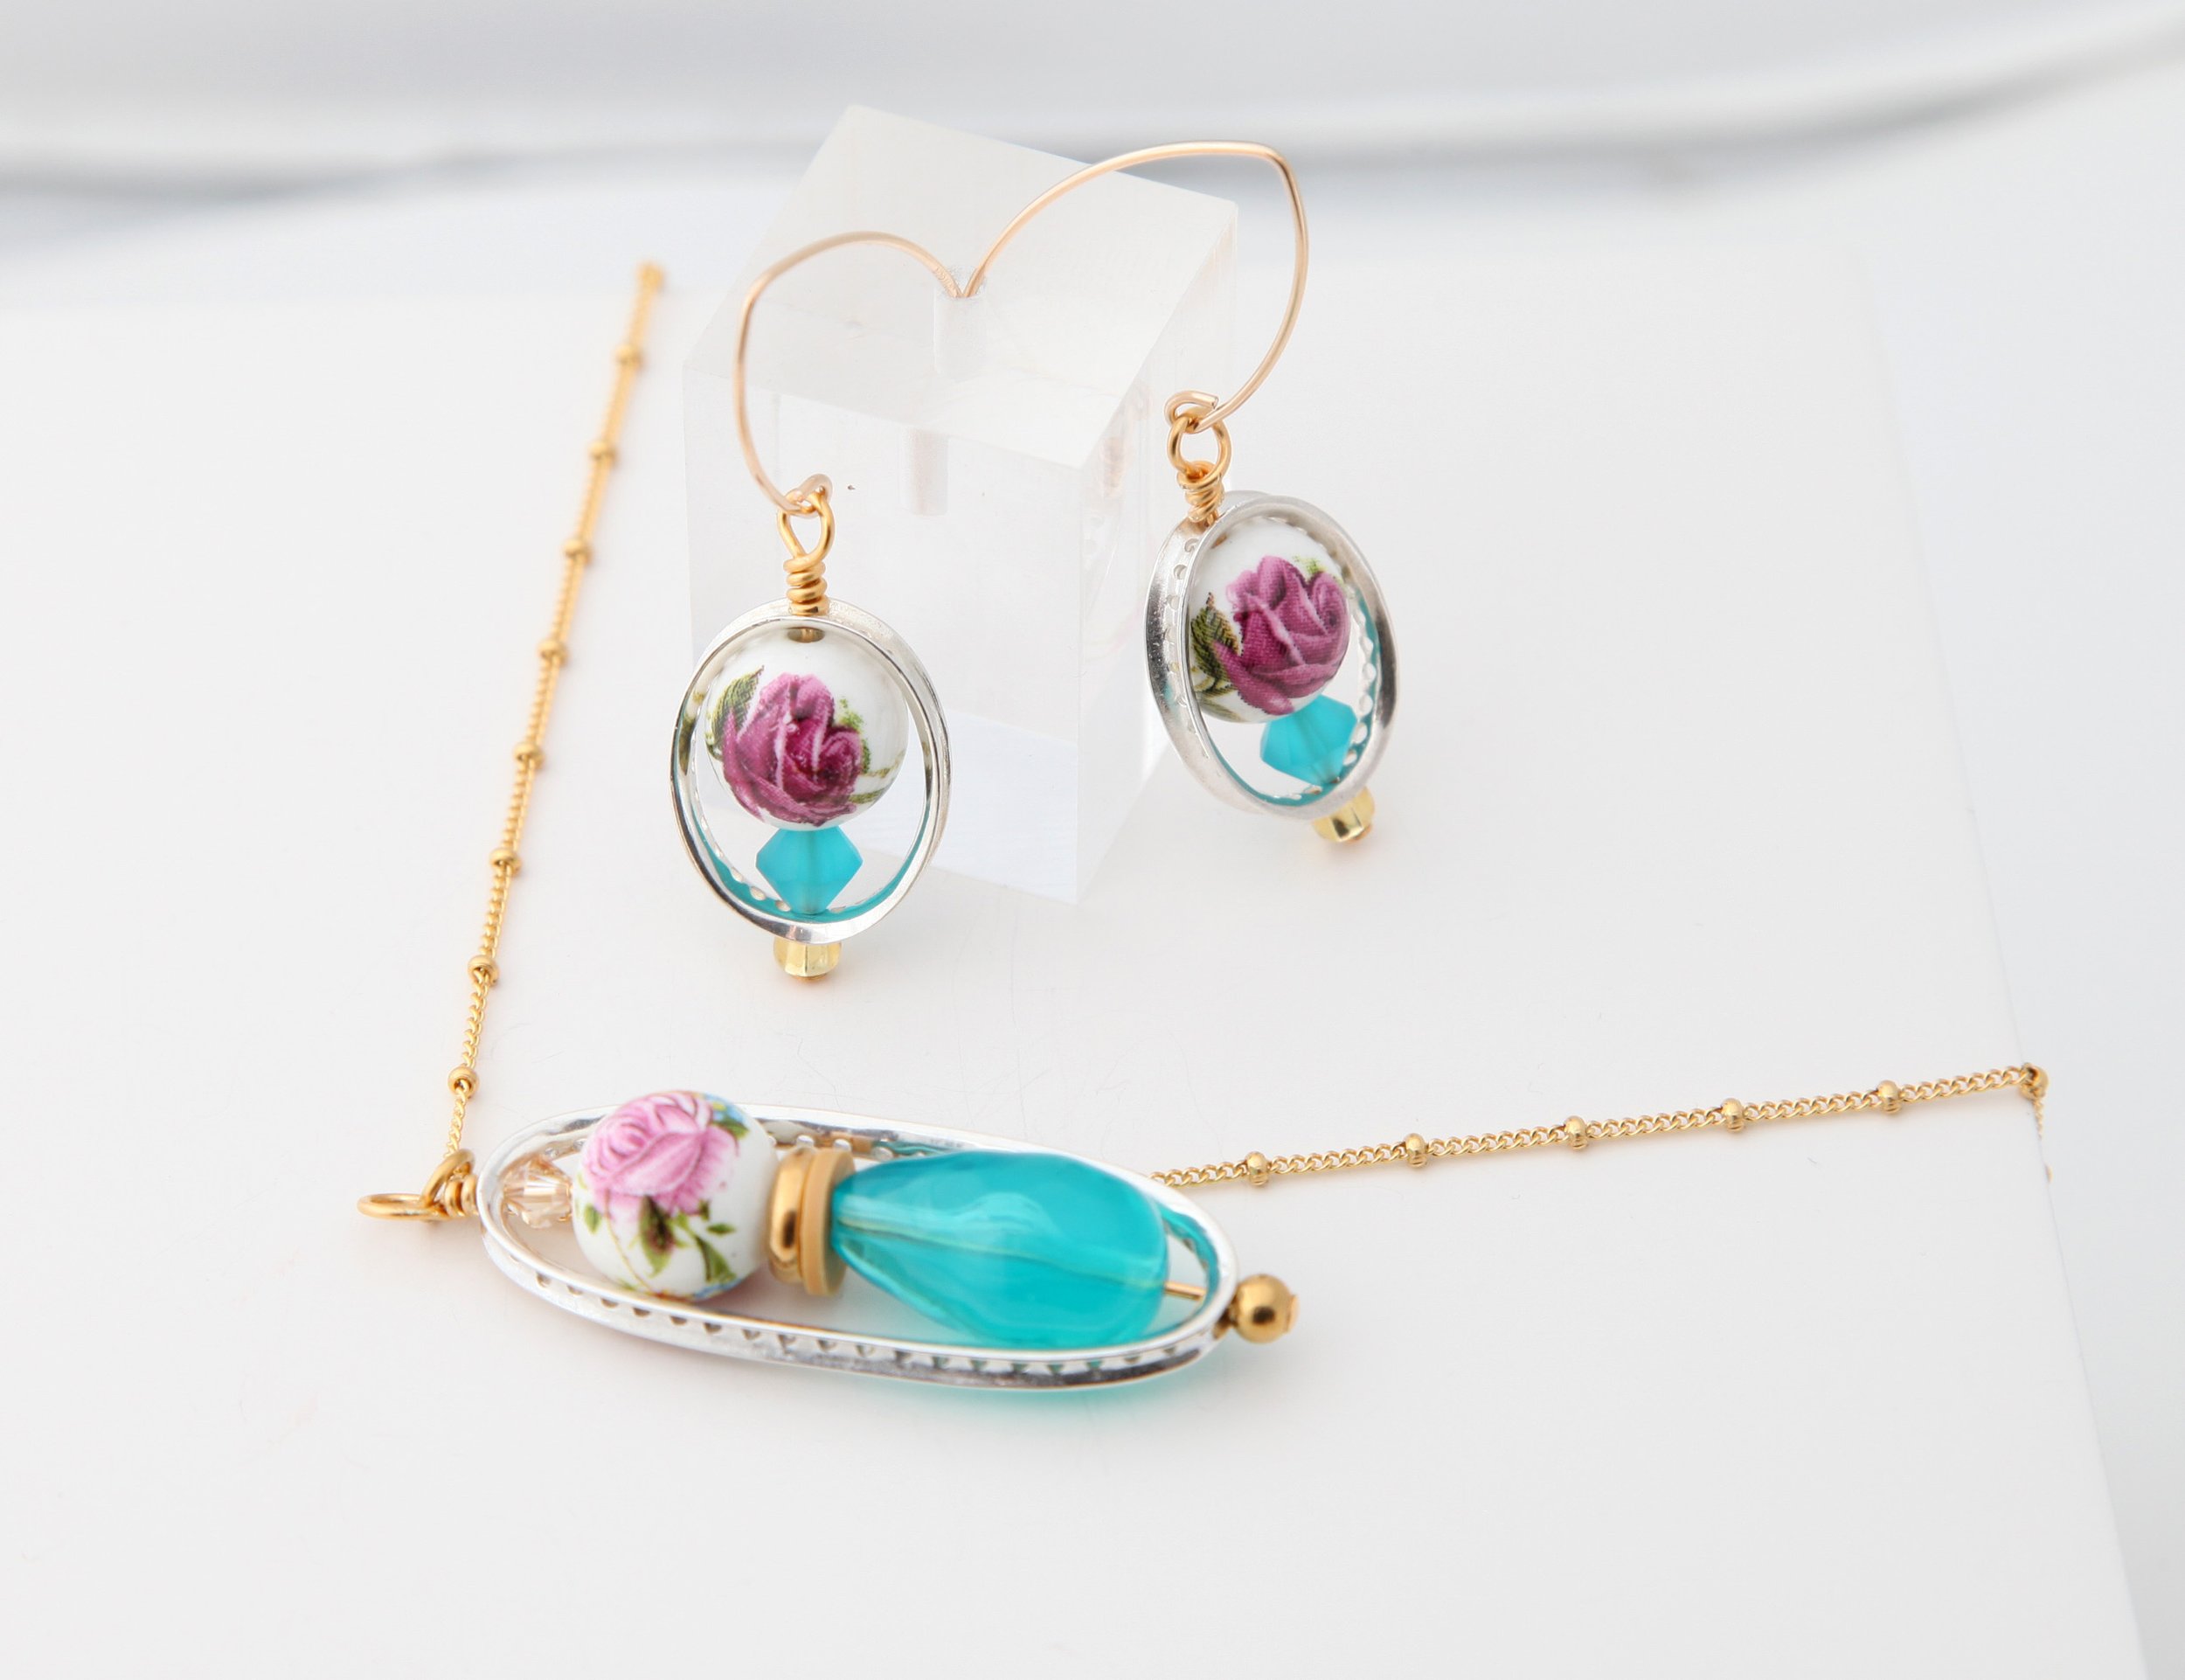 Rose vase necklace and earrings 1.jpg